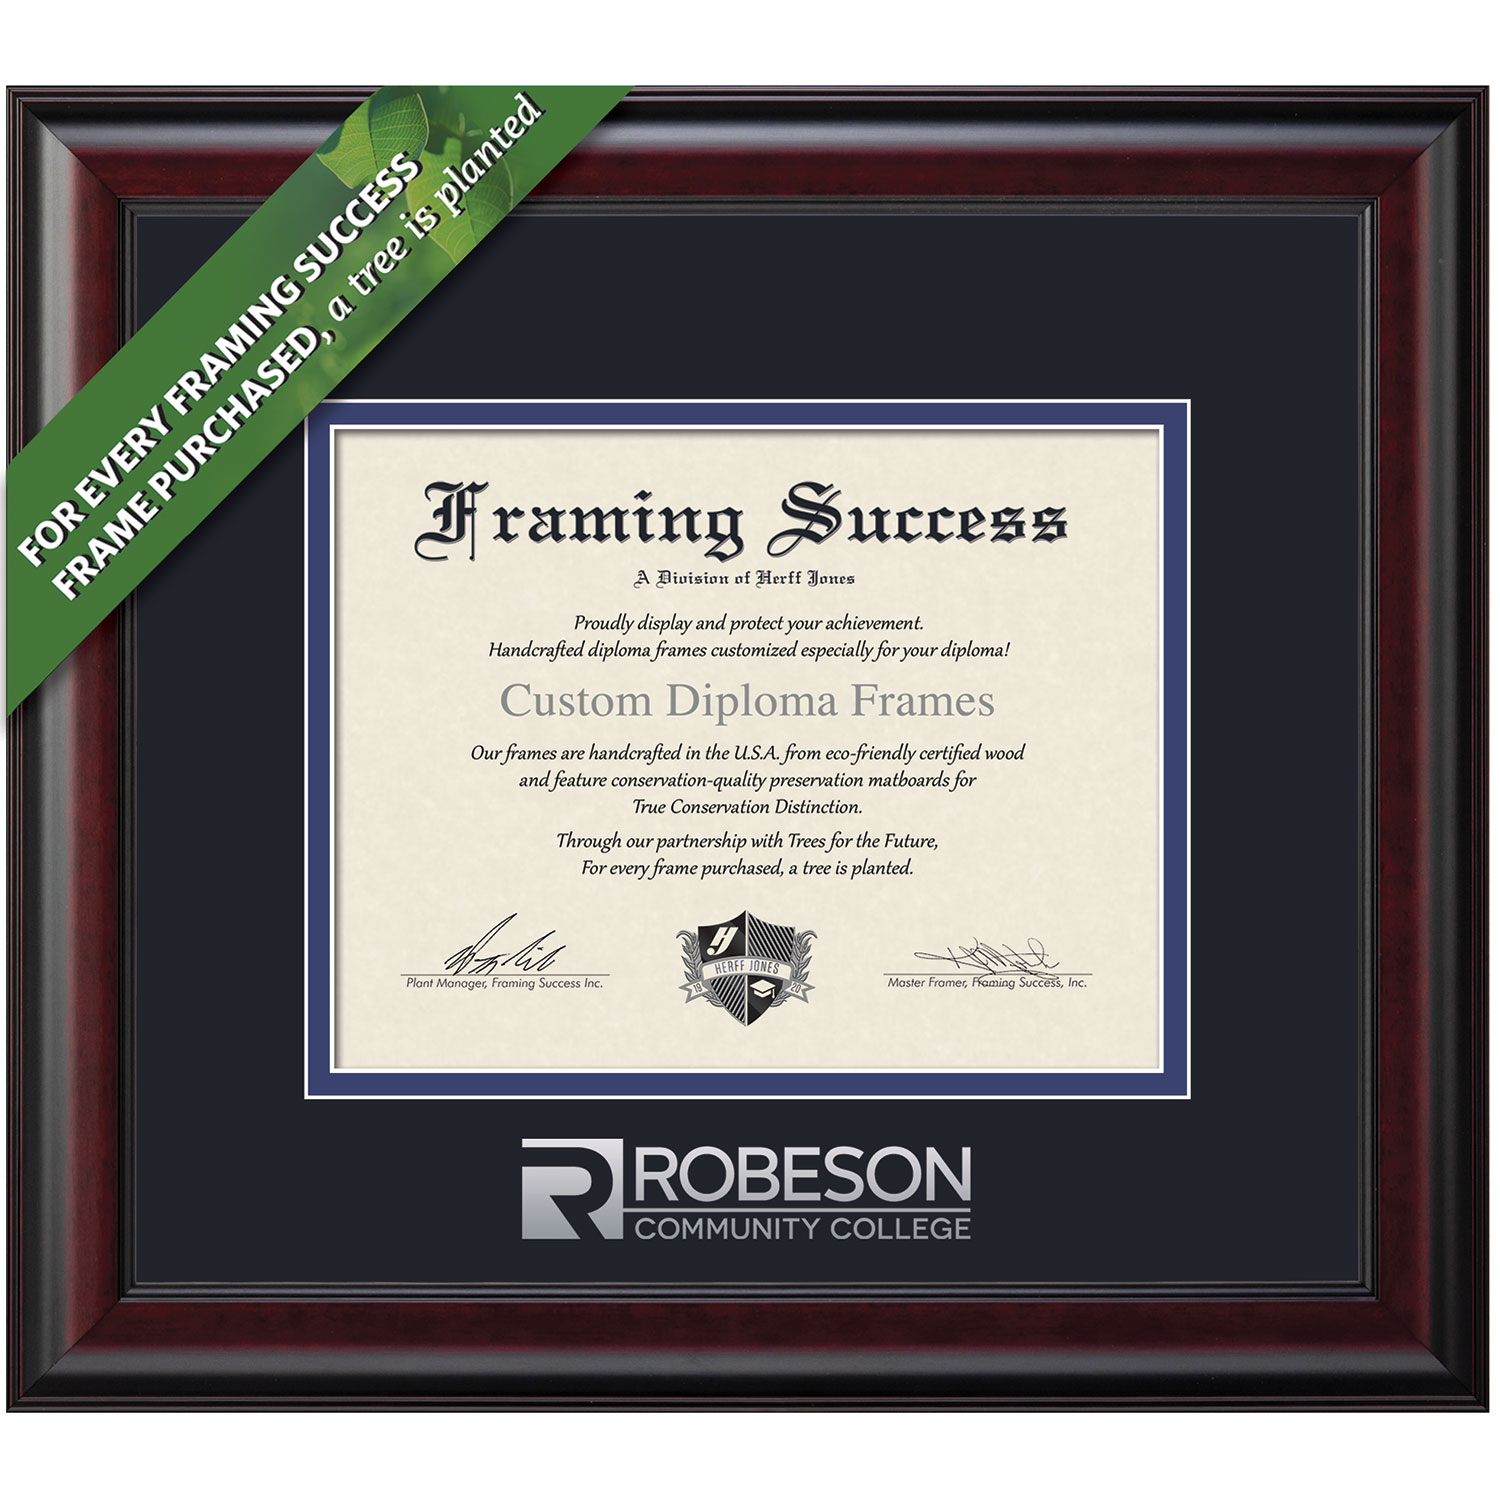 Framing Success 8.5 x 11 Classic Silver Embossed School Name Associates Diploma Frame